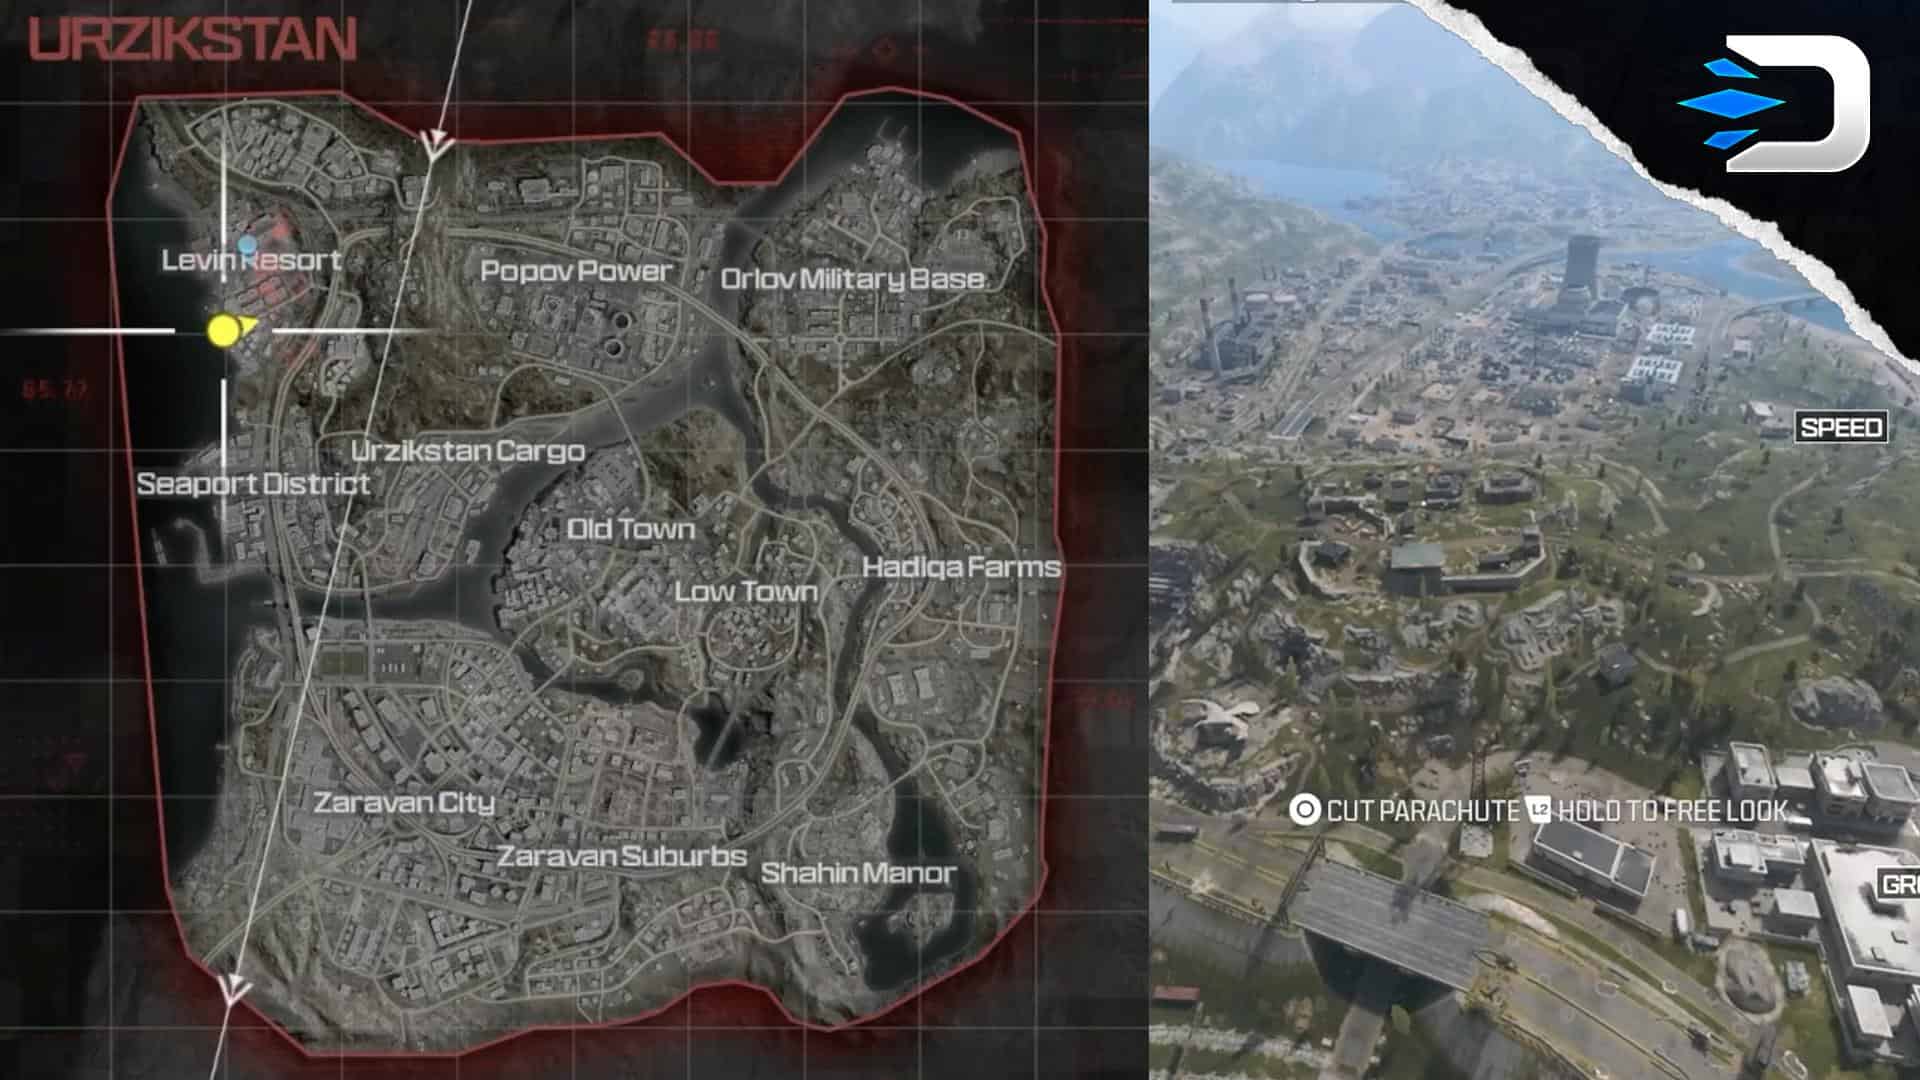 Call of Duty: Next Reveals Urzikstan, the New Big Map Coming to Call of  Duty: Warzone